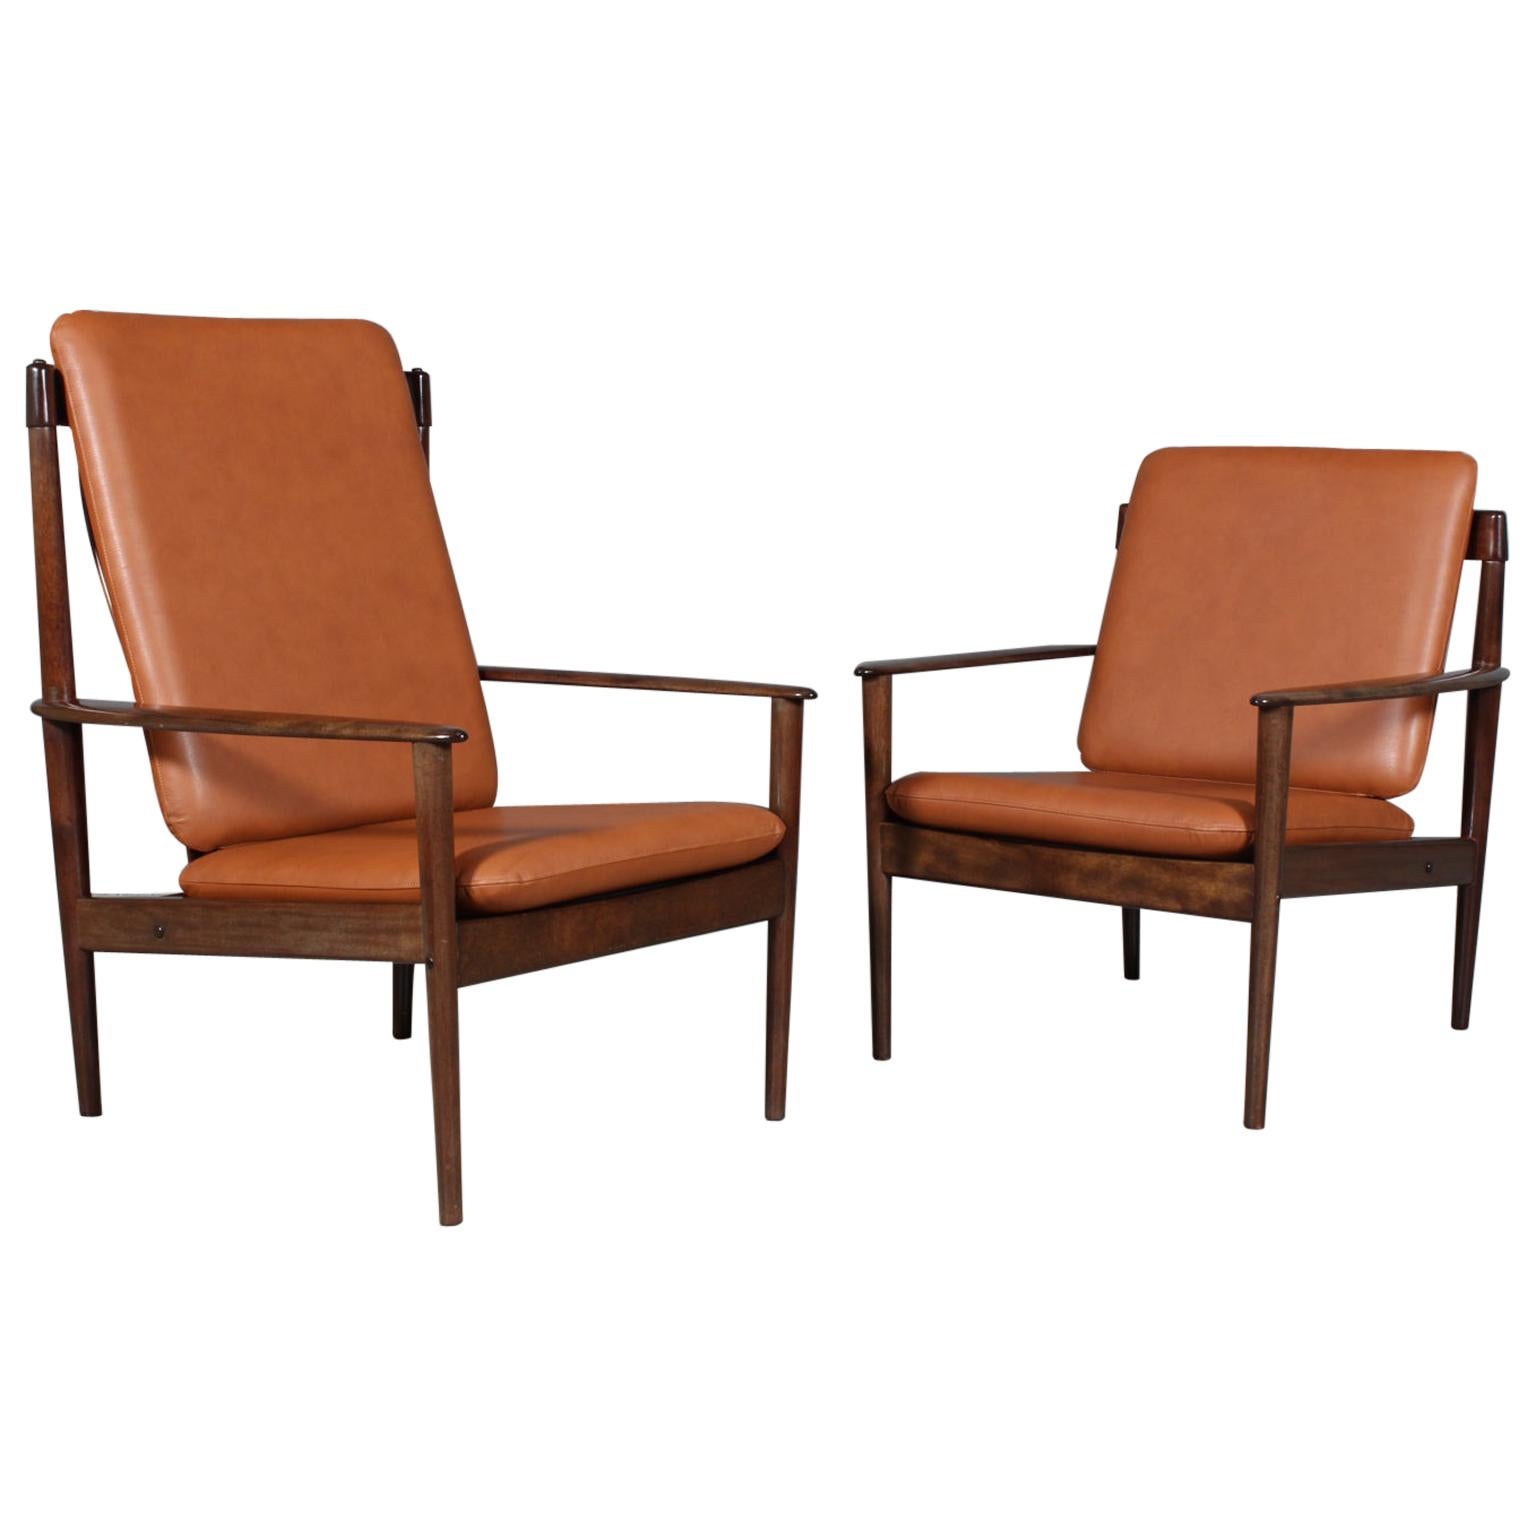 Pair of Grete Jalk Lounge Chair, in Mahogany